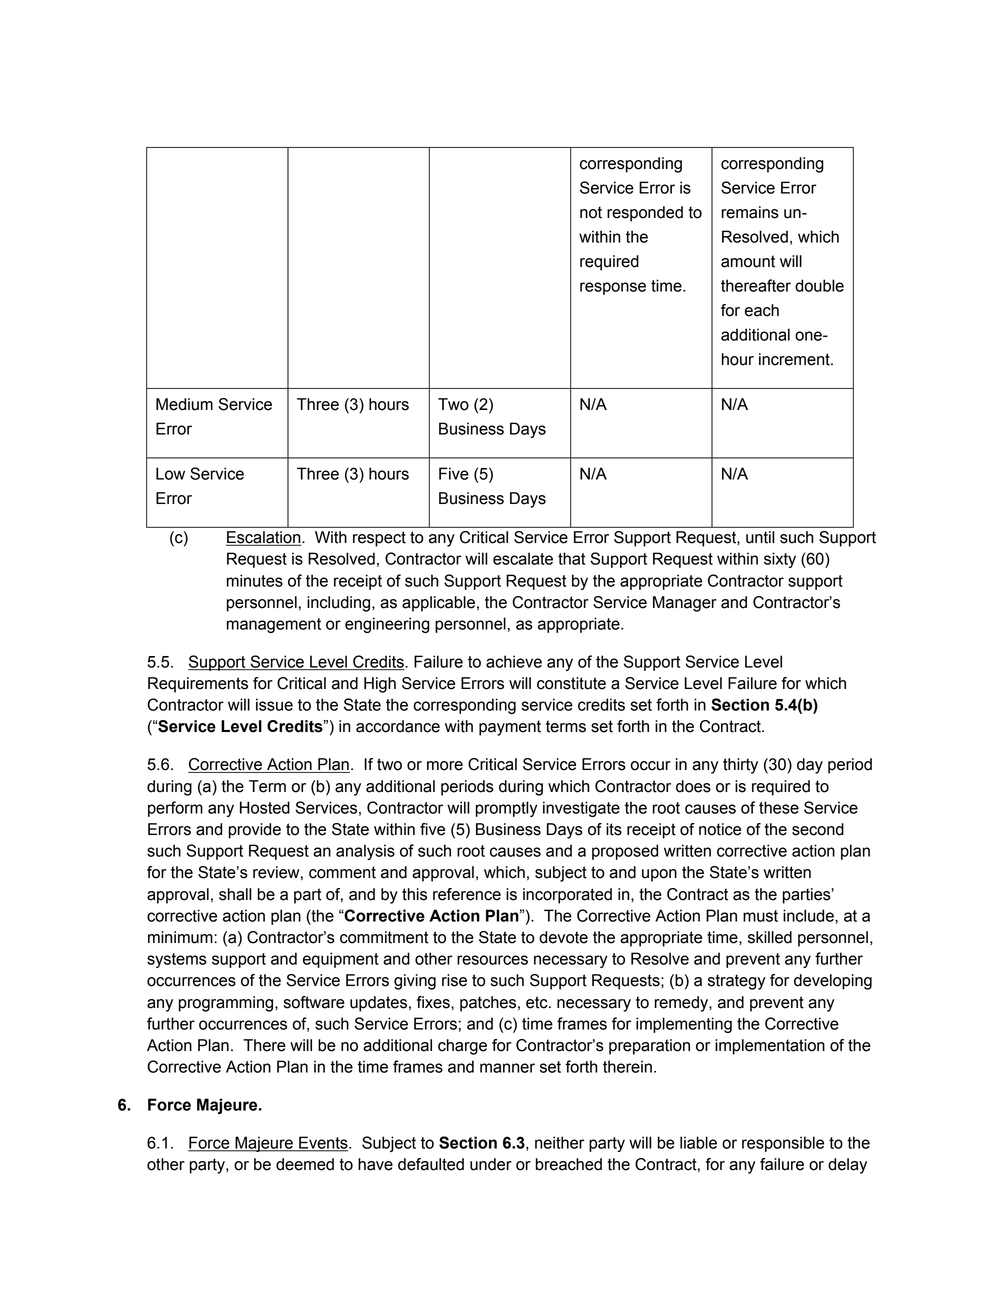 Page 67 from State of Michigan 2020 Kaseware contract